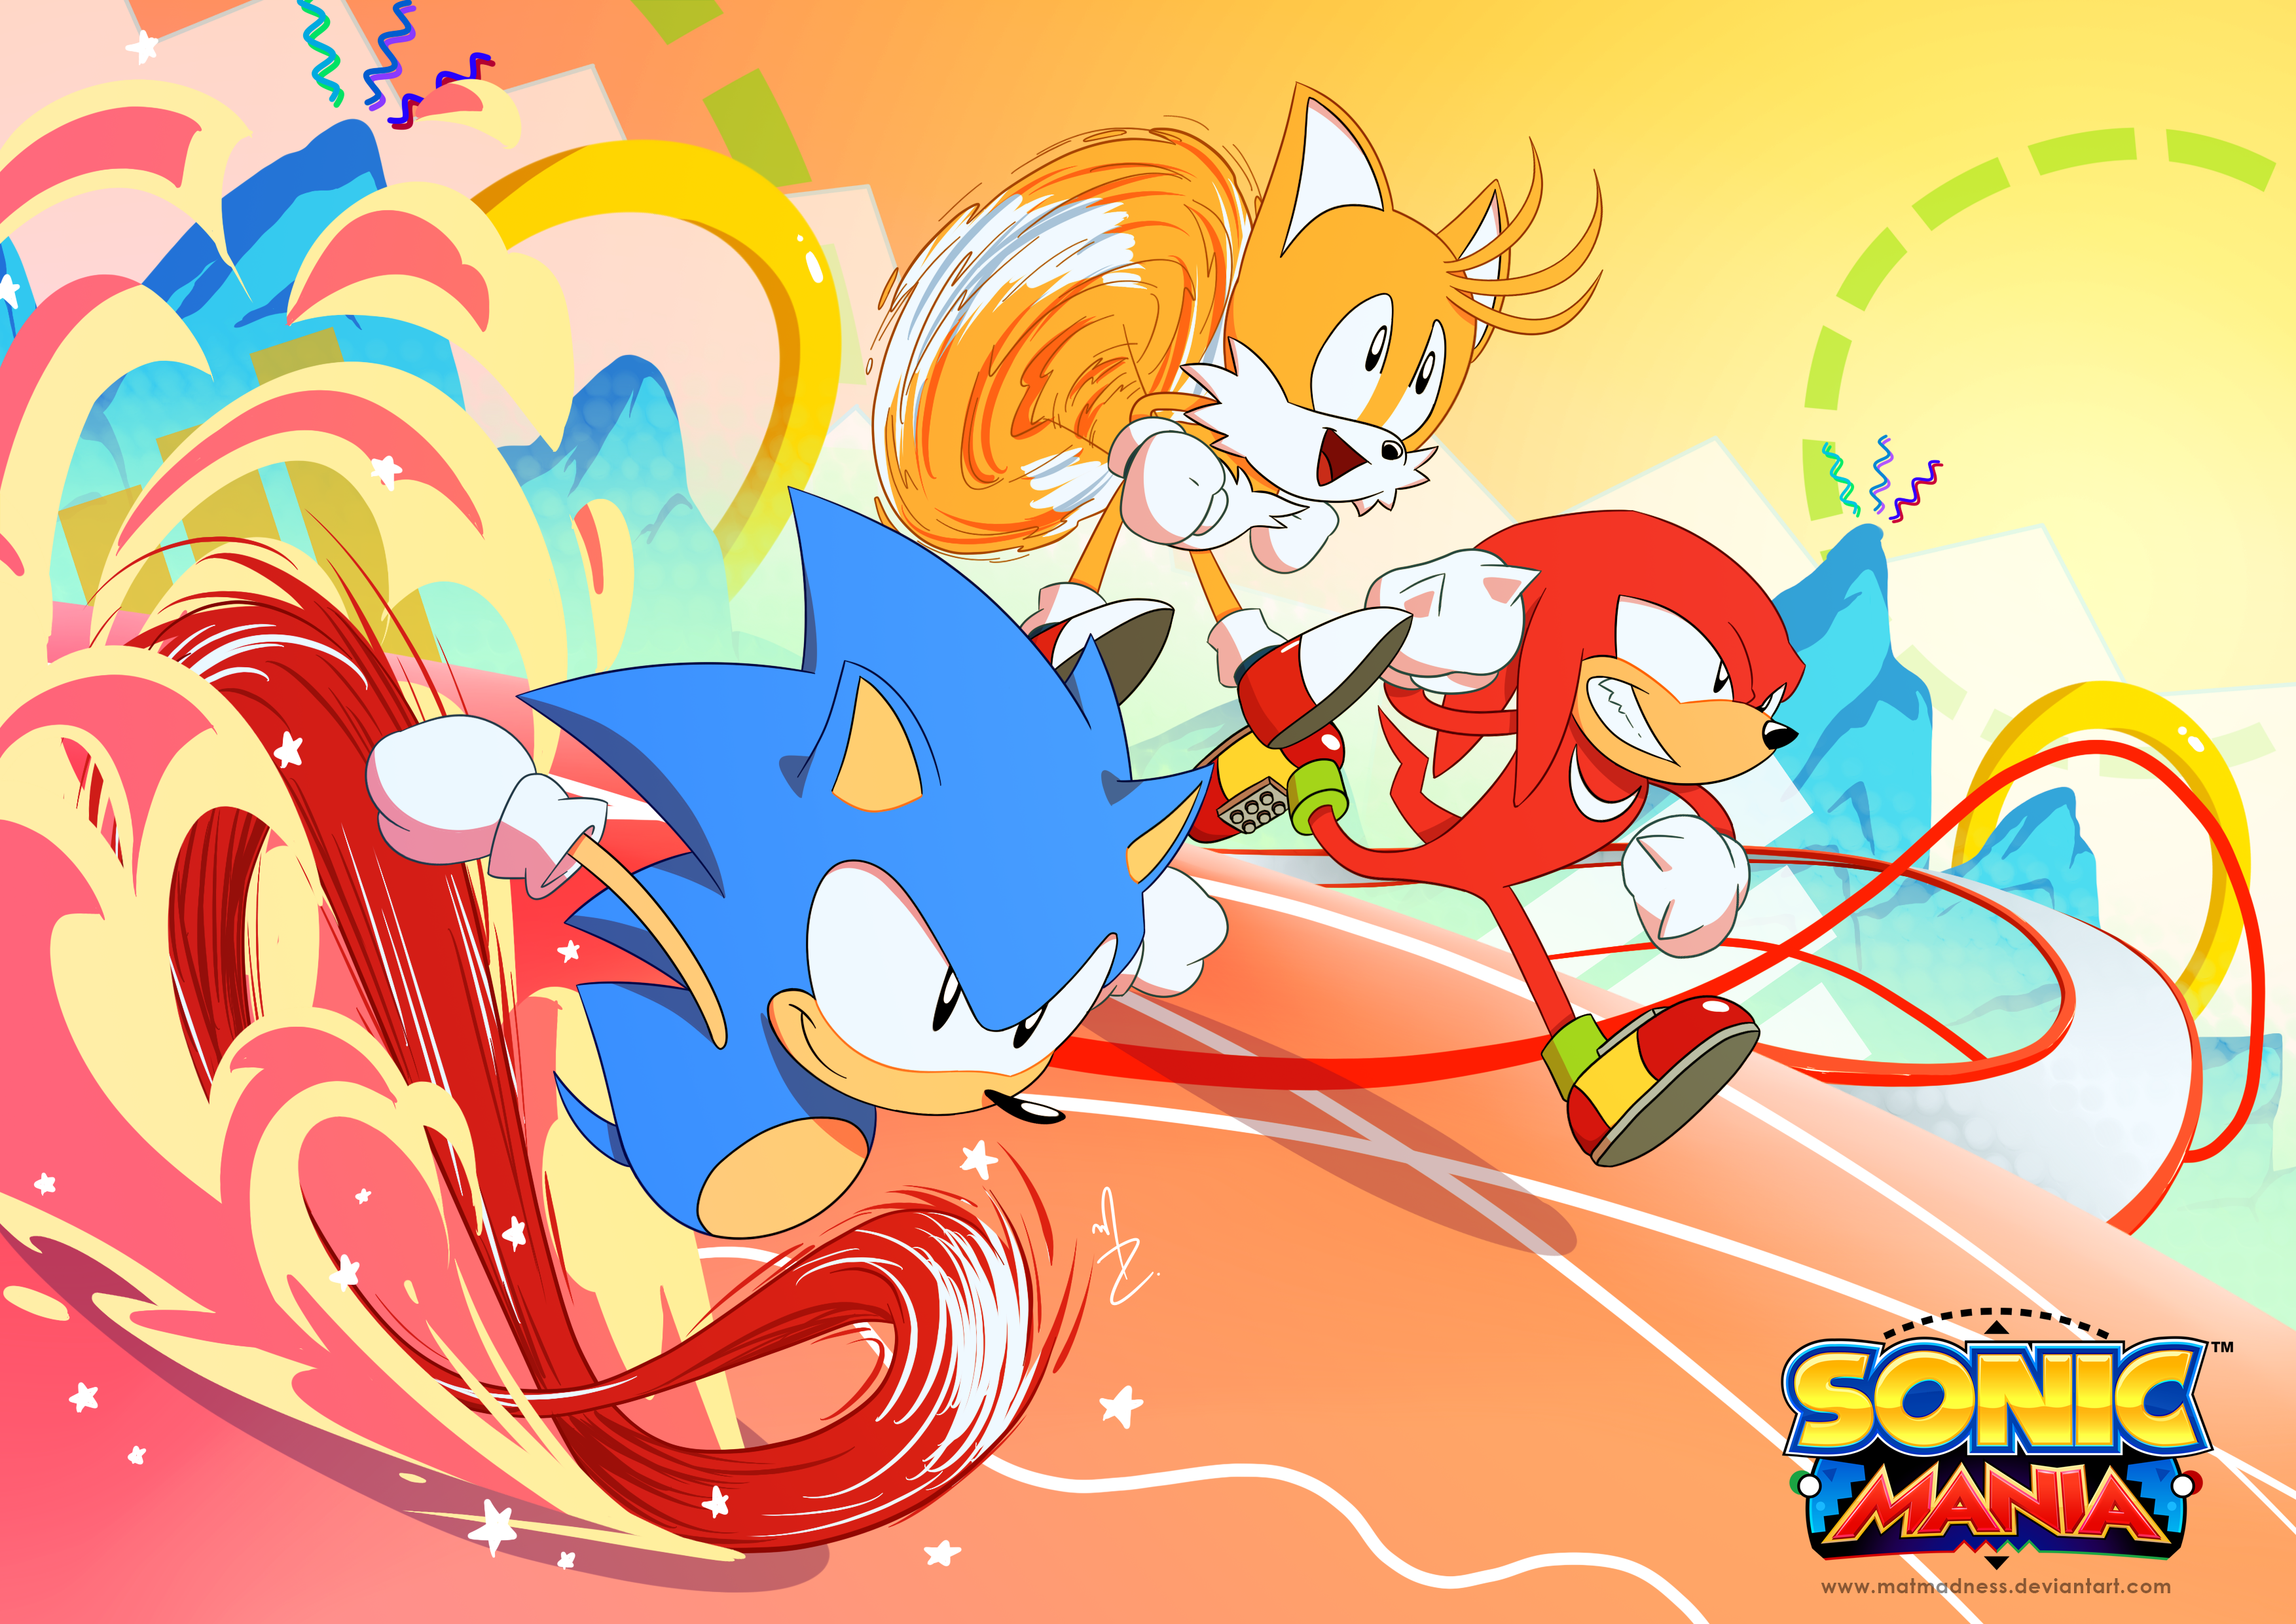 Classic Tails - Desktop Wallpapers, Phone Wallpaper, PFP, Gifs, and More!